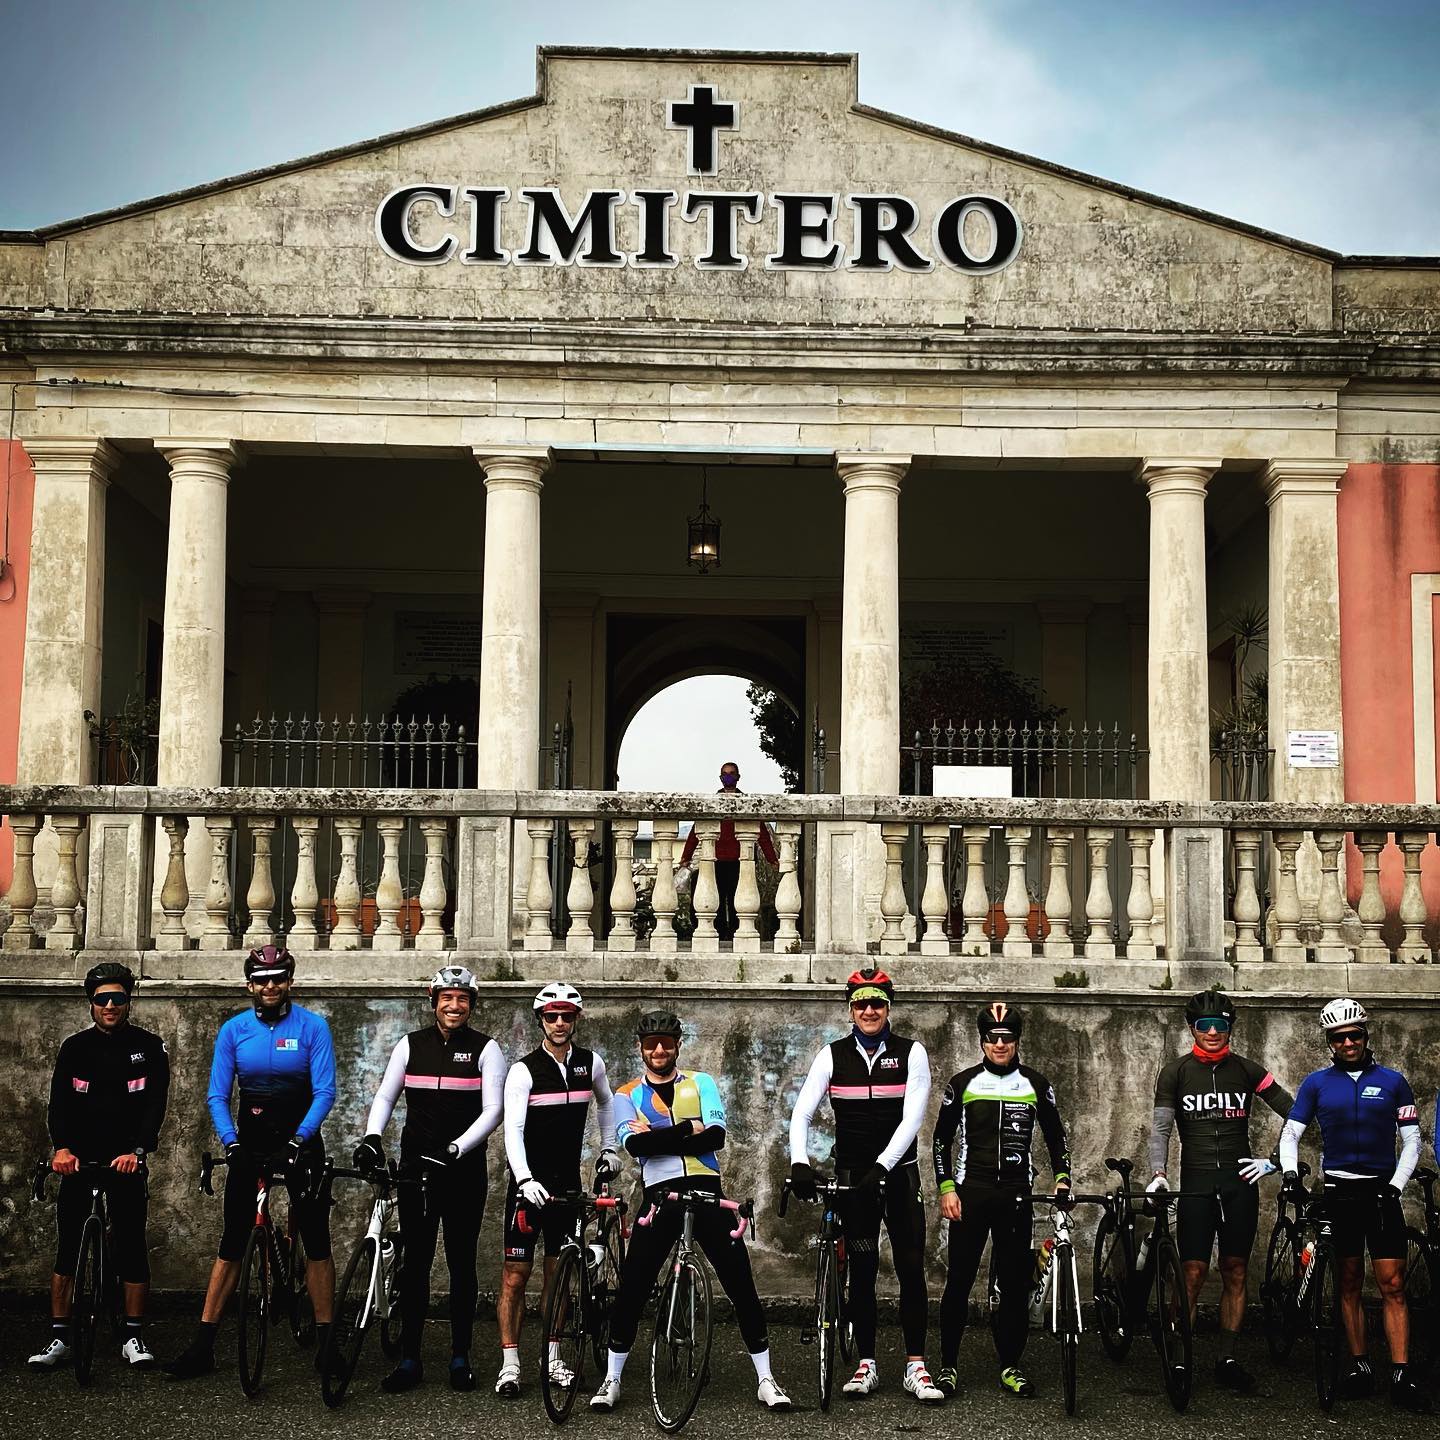 During our group rides we like to stop and take photos all together in front of the cemetery. Yes we are strange! 🤣

#cyclingteam #cyclingholiday #giroditalia #cyclingpassion #cyclingapparel #roadbikelife #cyclingstyle #cyclinggirls #biketravel #sicilytourism #cyclingfood #cyclingislife #italycycling #cyclinglovers #lovecycling #lovesicily #cyclingshot #roadbikepics #cyclingmotivation #bespoketravel #etnavolcano #gruppetto
#sicilycyclingclub #gravelride #gravelroad #cyclingphotos #minchia #cemetery